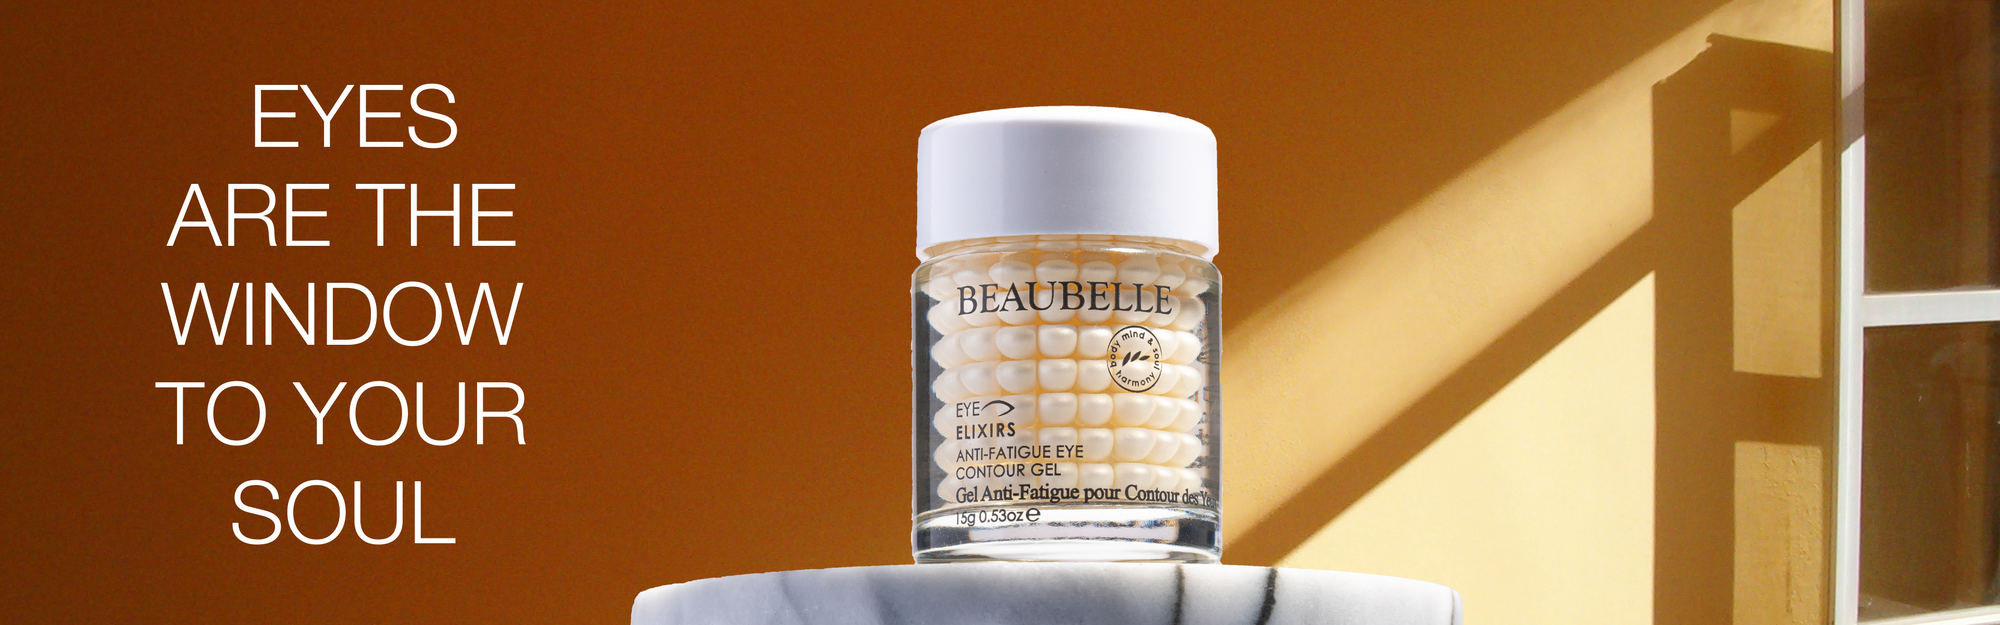 Beaubelle Products